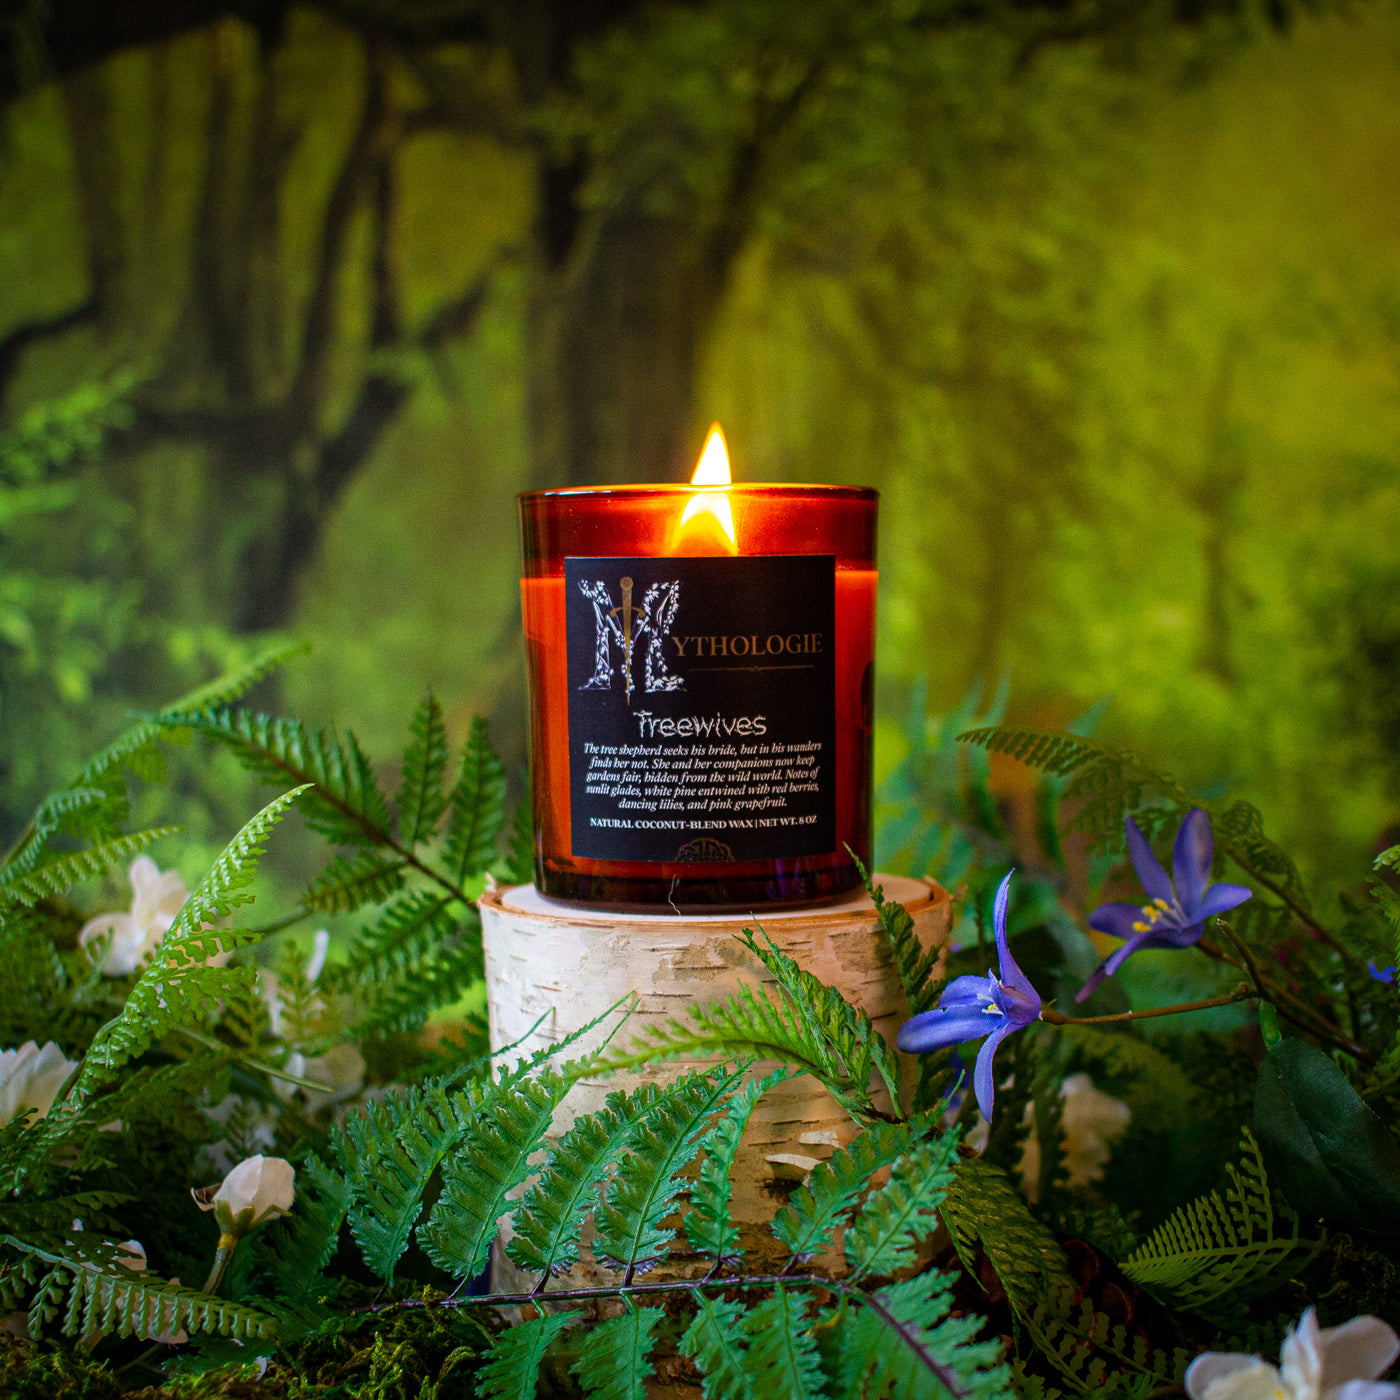 New Candle Inspired by the Entwives of Middle Earth